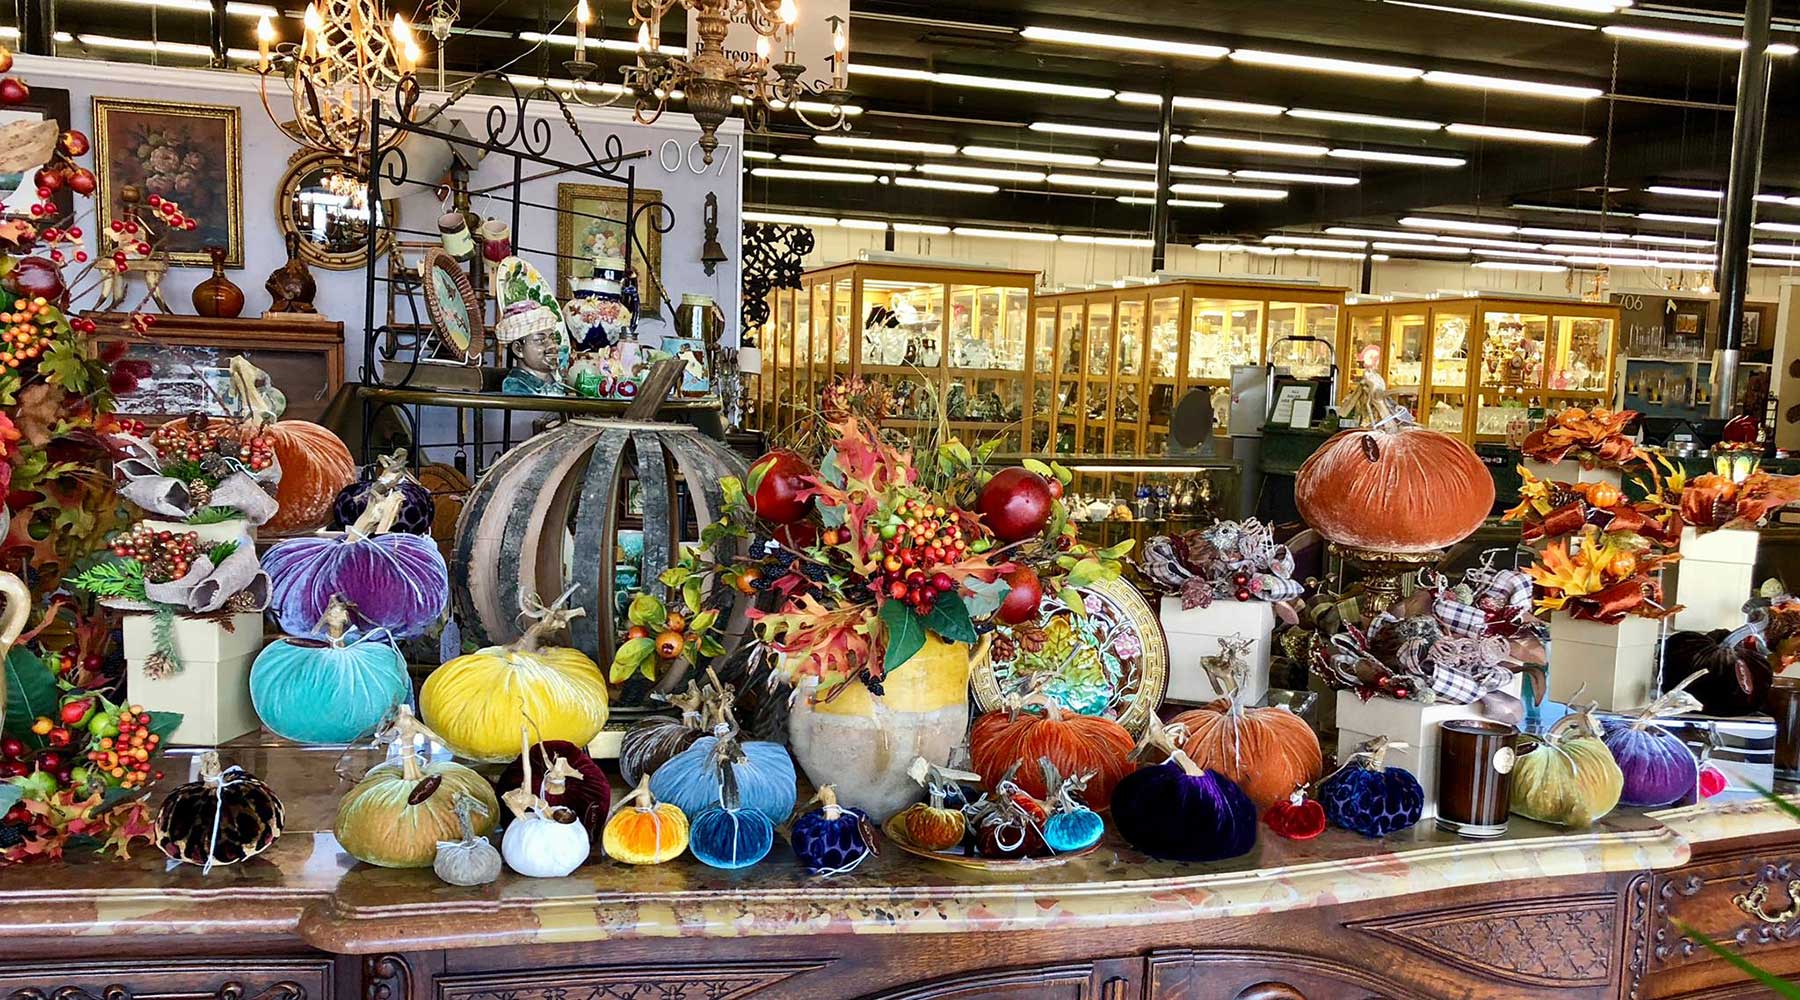 Variety of collectibles and decor items to be found at Forestwood Antique Mall